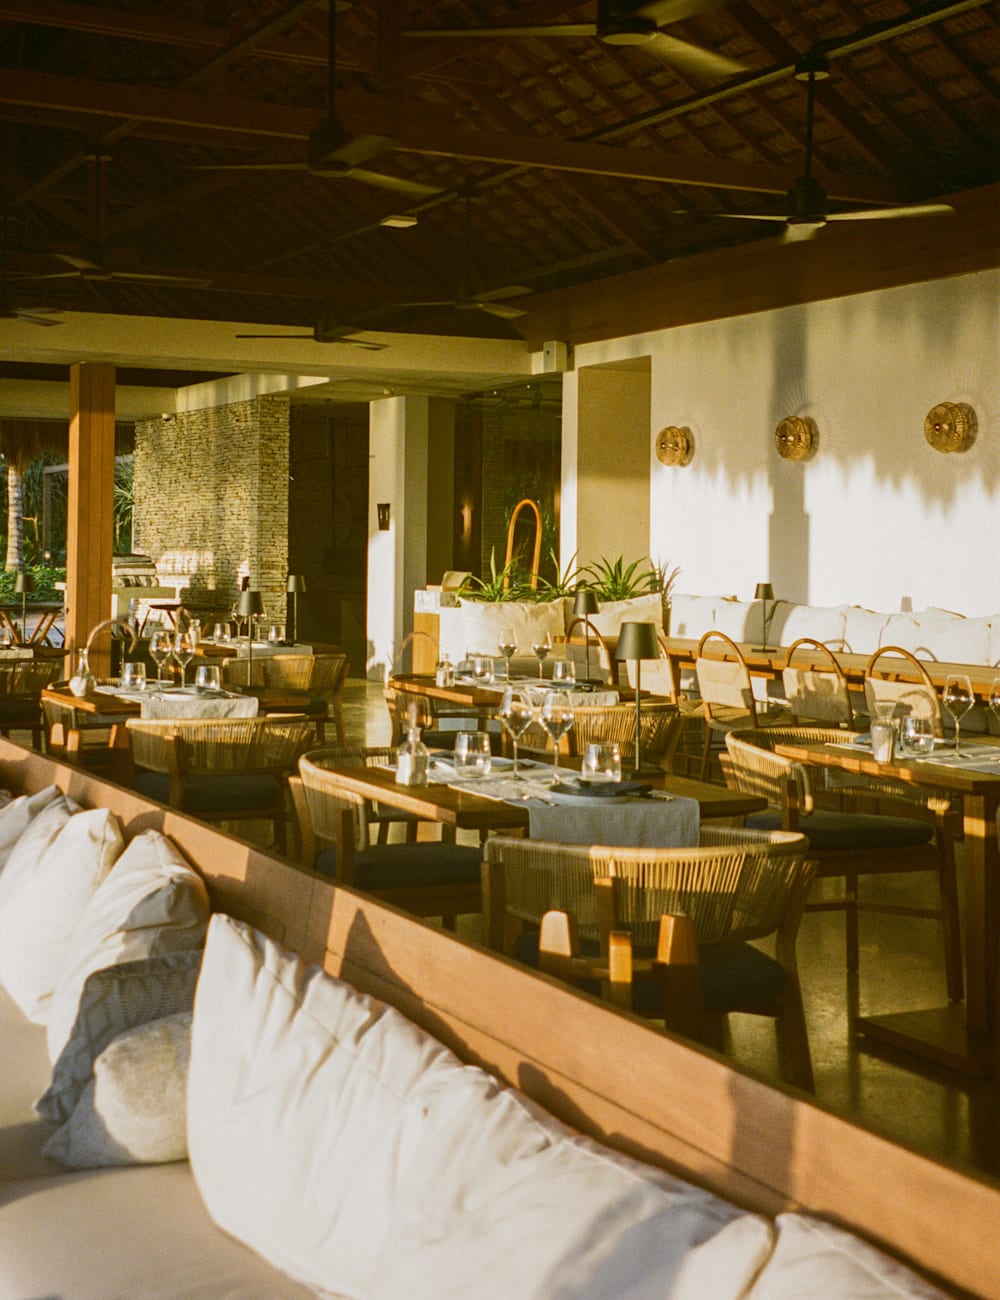 The sunlit restaurant at Cap Karoso, Sumba, by Hannah Dace for Mr & Mrs Smith